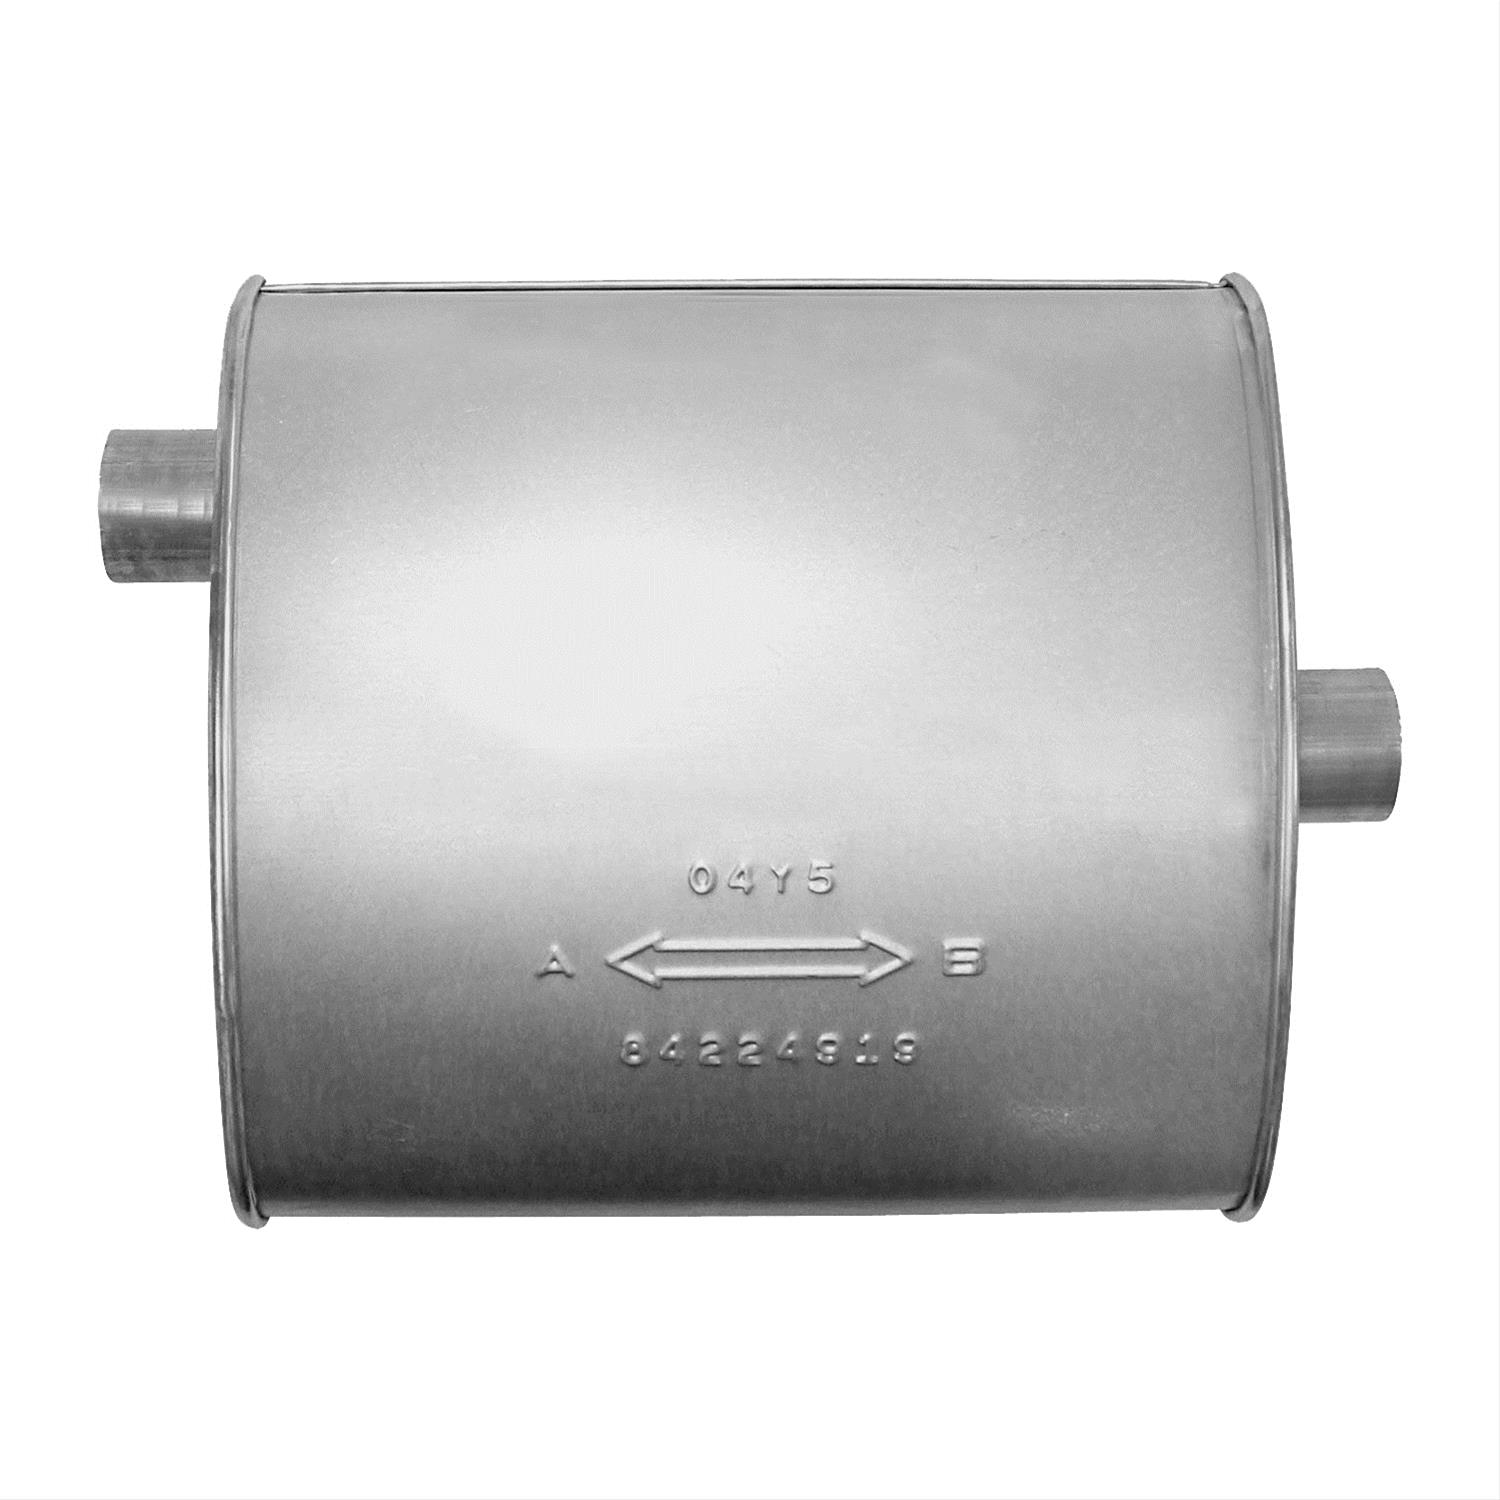 AP Exhaust 700427 Direct Fit MSL Maximum Oval Rear Muffler for Chevy Malibu